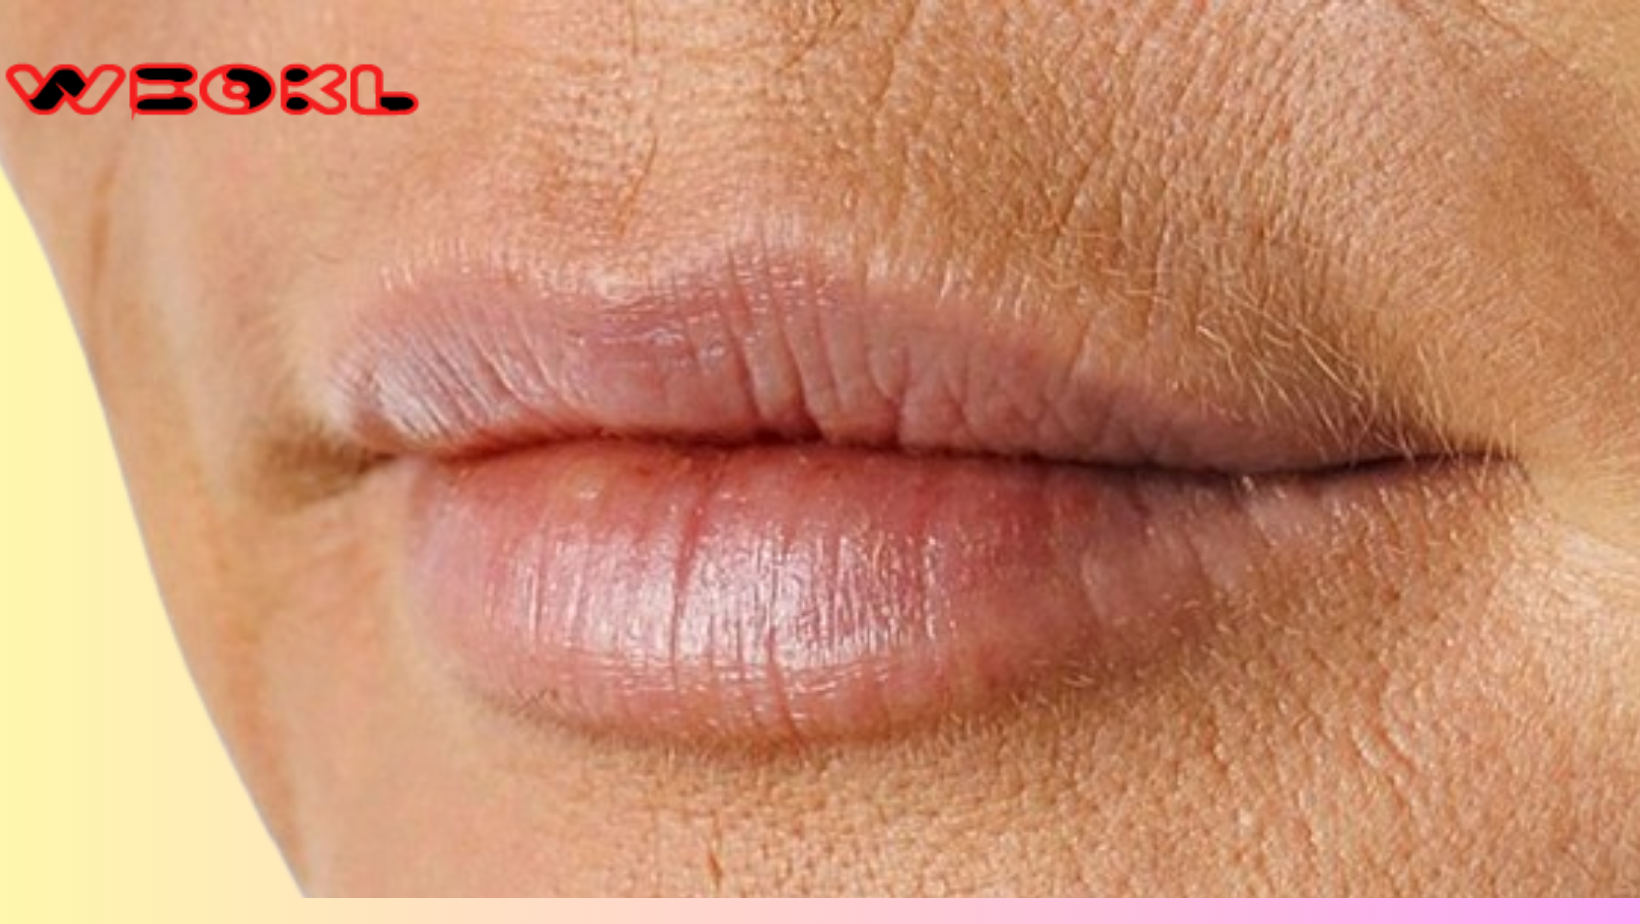 HOW TO REMOVE DEEP MOUTH WRINKLES REALLTY FAST